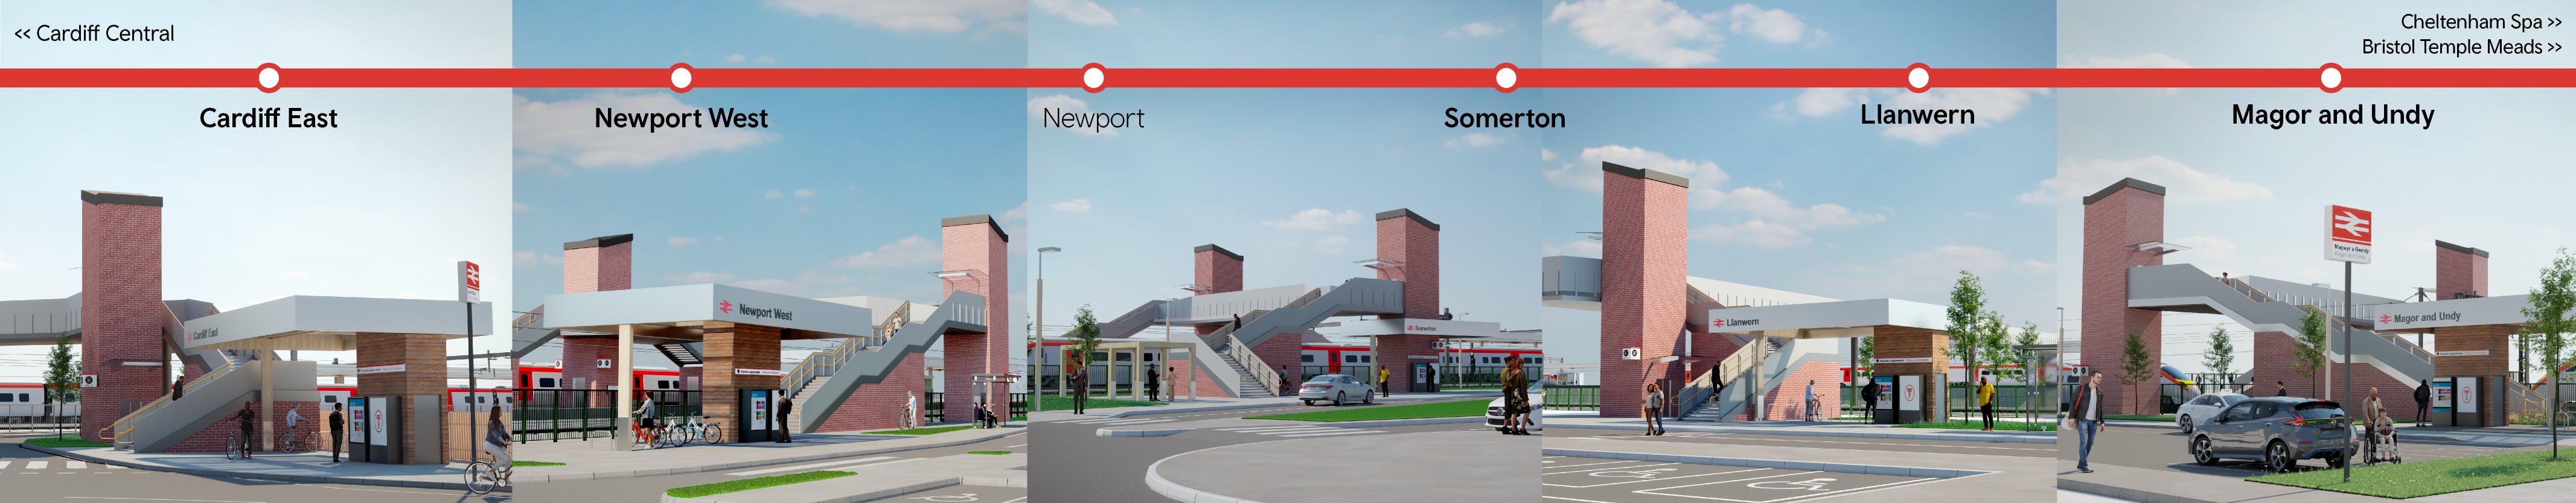 A banner shows visualisations of each of the 5 proposed station designs